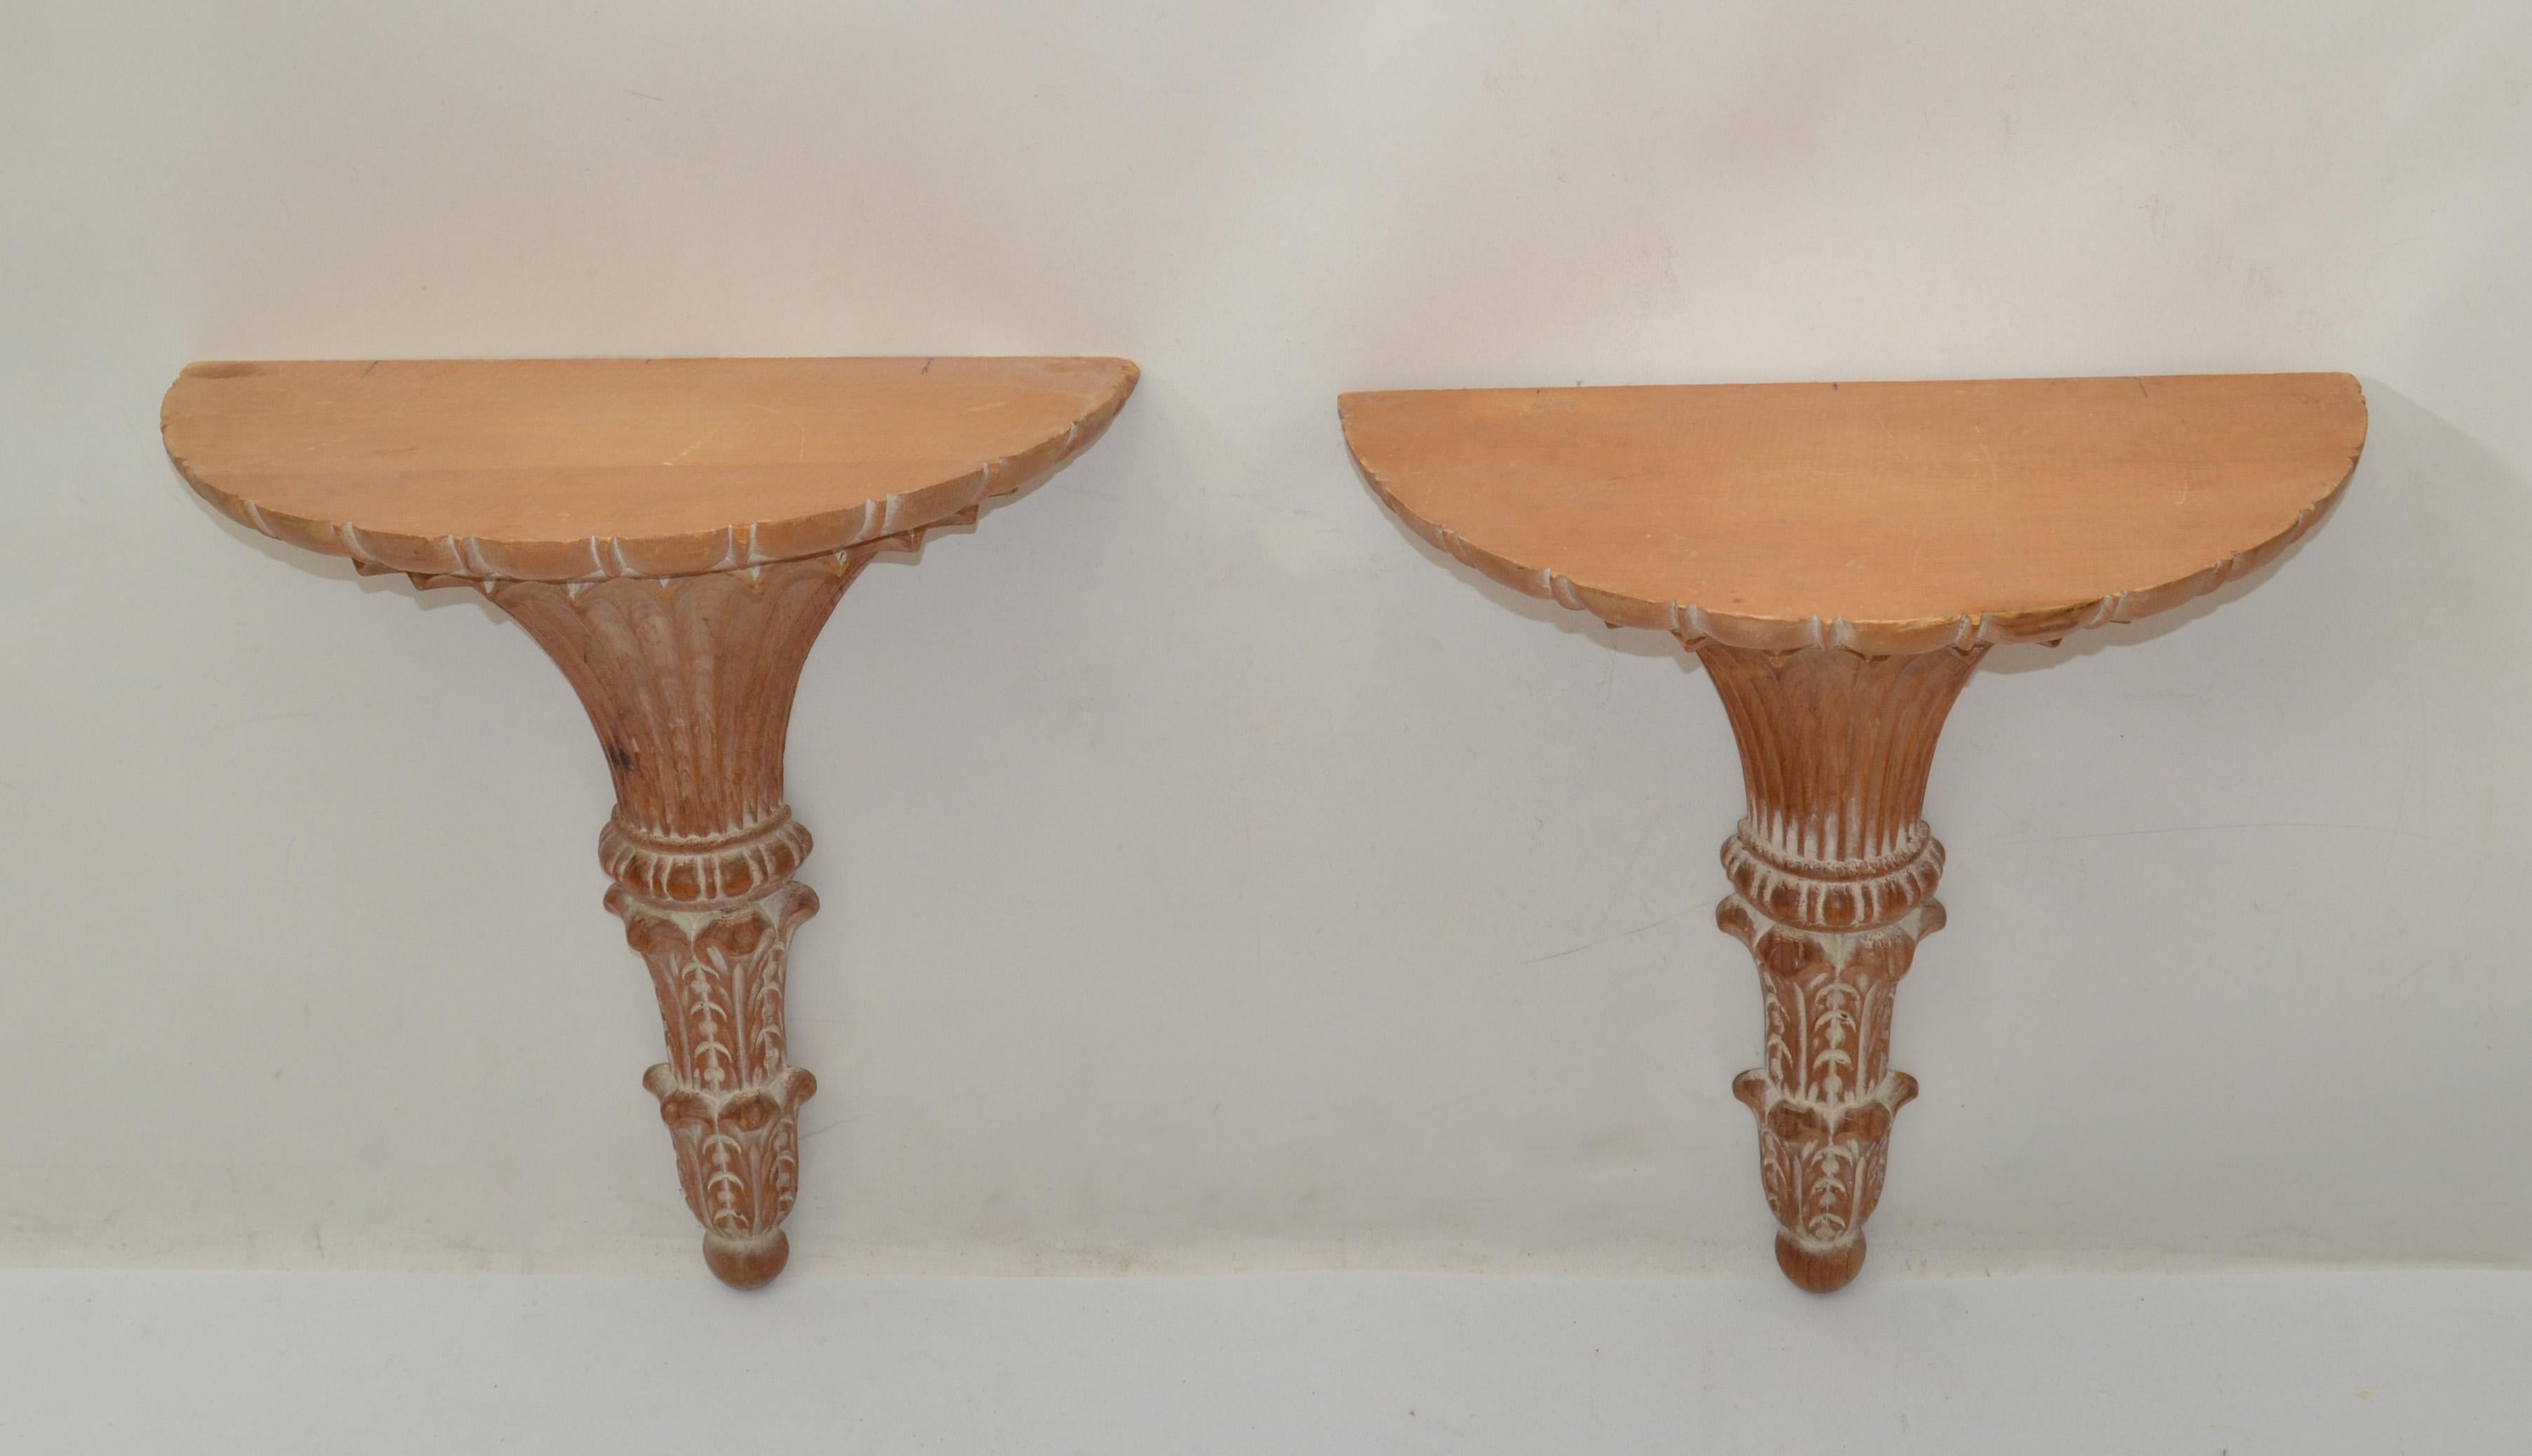 Neoclassical Pair Italian Florentine Vintage Hand Carved Wood Wall Shelf Brackets Sconces